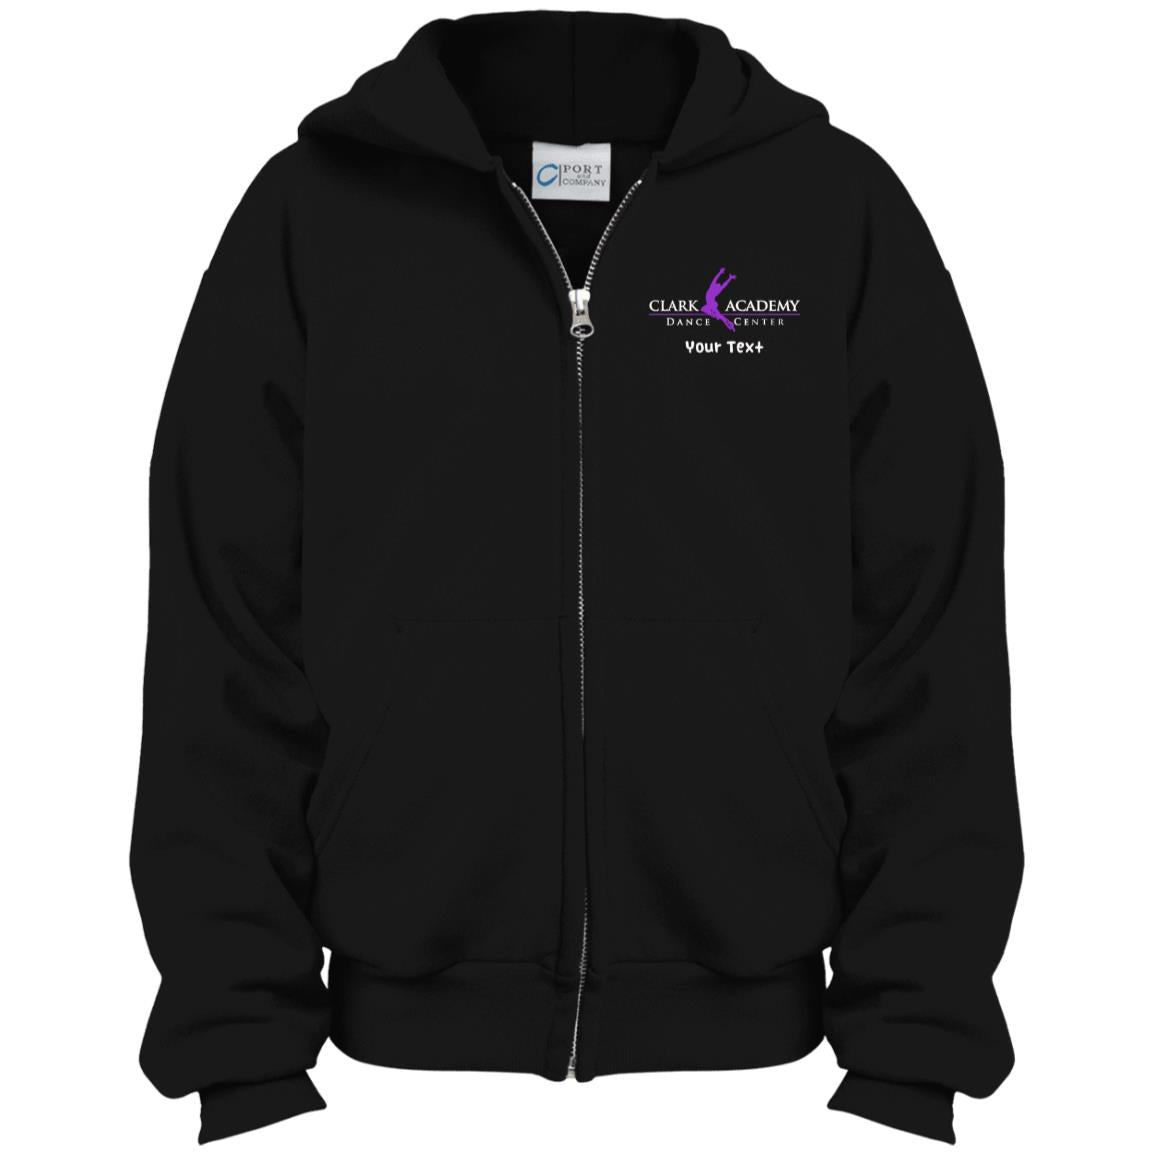 CADC Youth Full Zip Hoodie - With Personalization